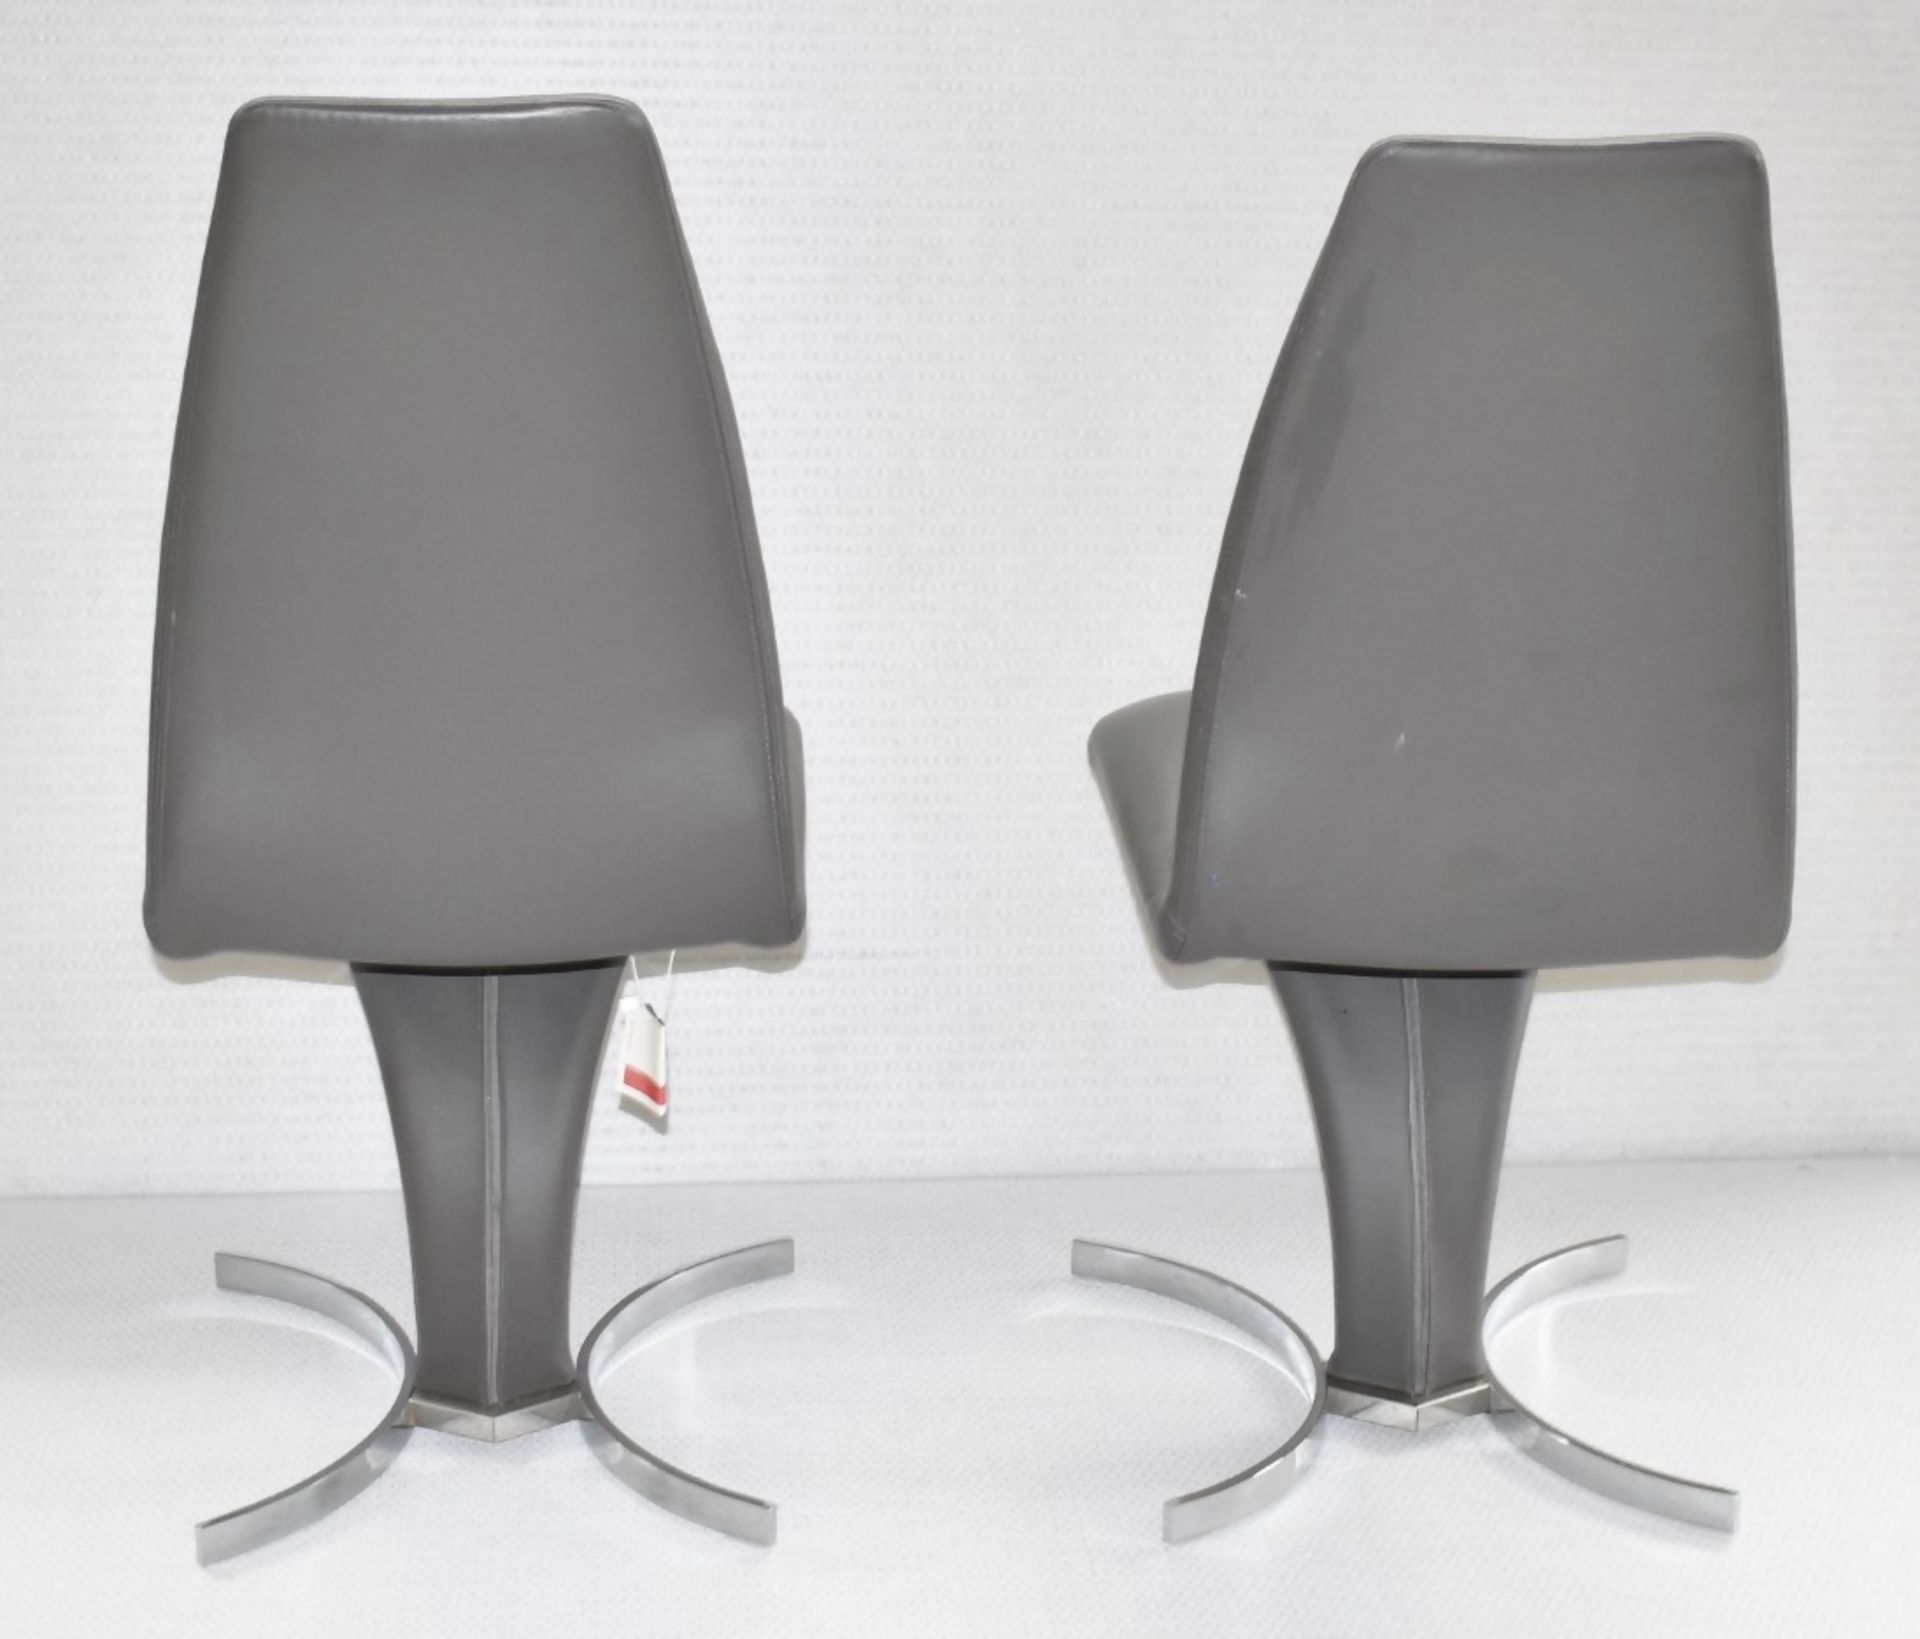 Pair Of CATTELAN ITALIA Luxury Premium Leather Upholstered 'Betty' Dining Chairs - RRP £1,886 - Image 3 of 9